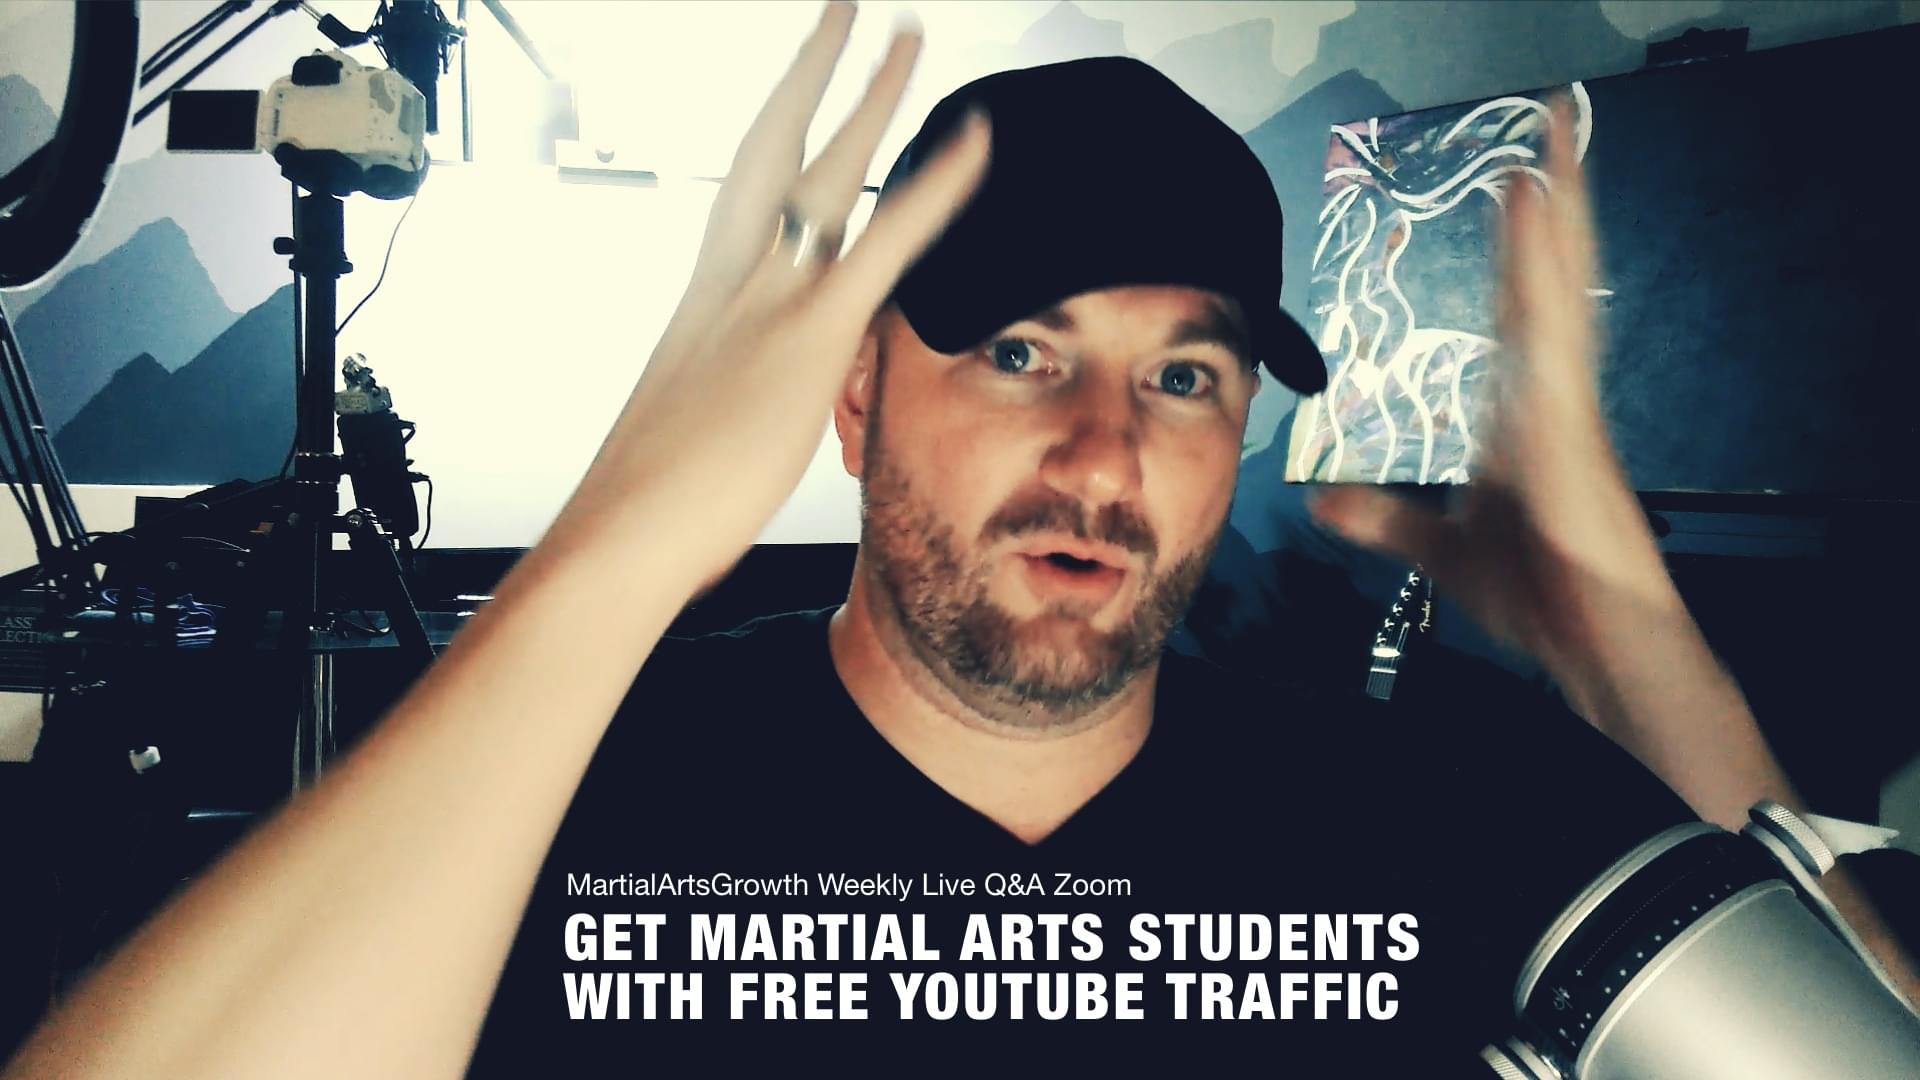 How To Grow A Martial Arts Business Using Free Traffic From YouTube Videos